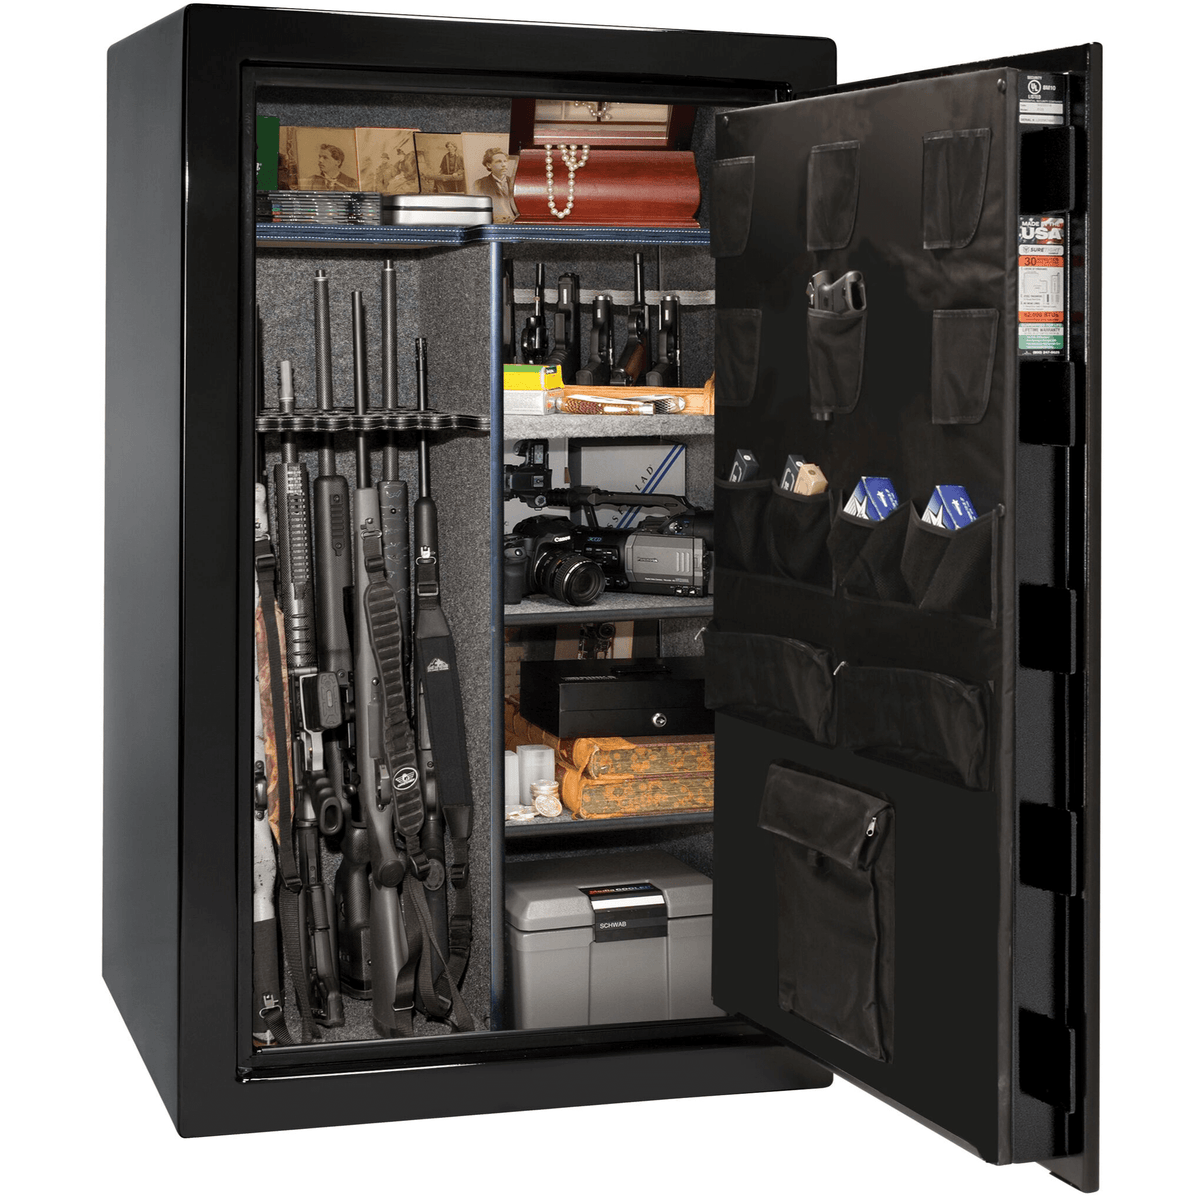 USA Series | Level 3 Security | 60 Minute Fire Rating | Liberty Safe Norcal.